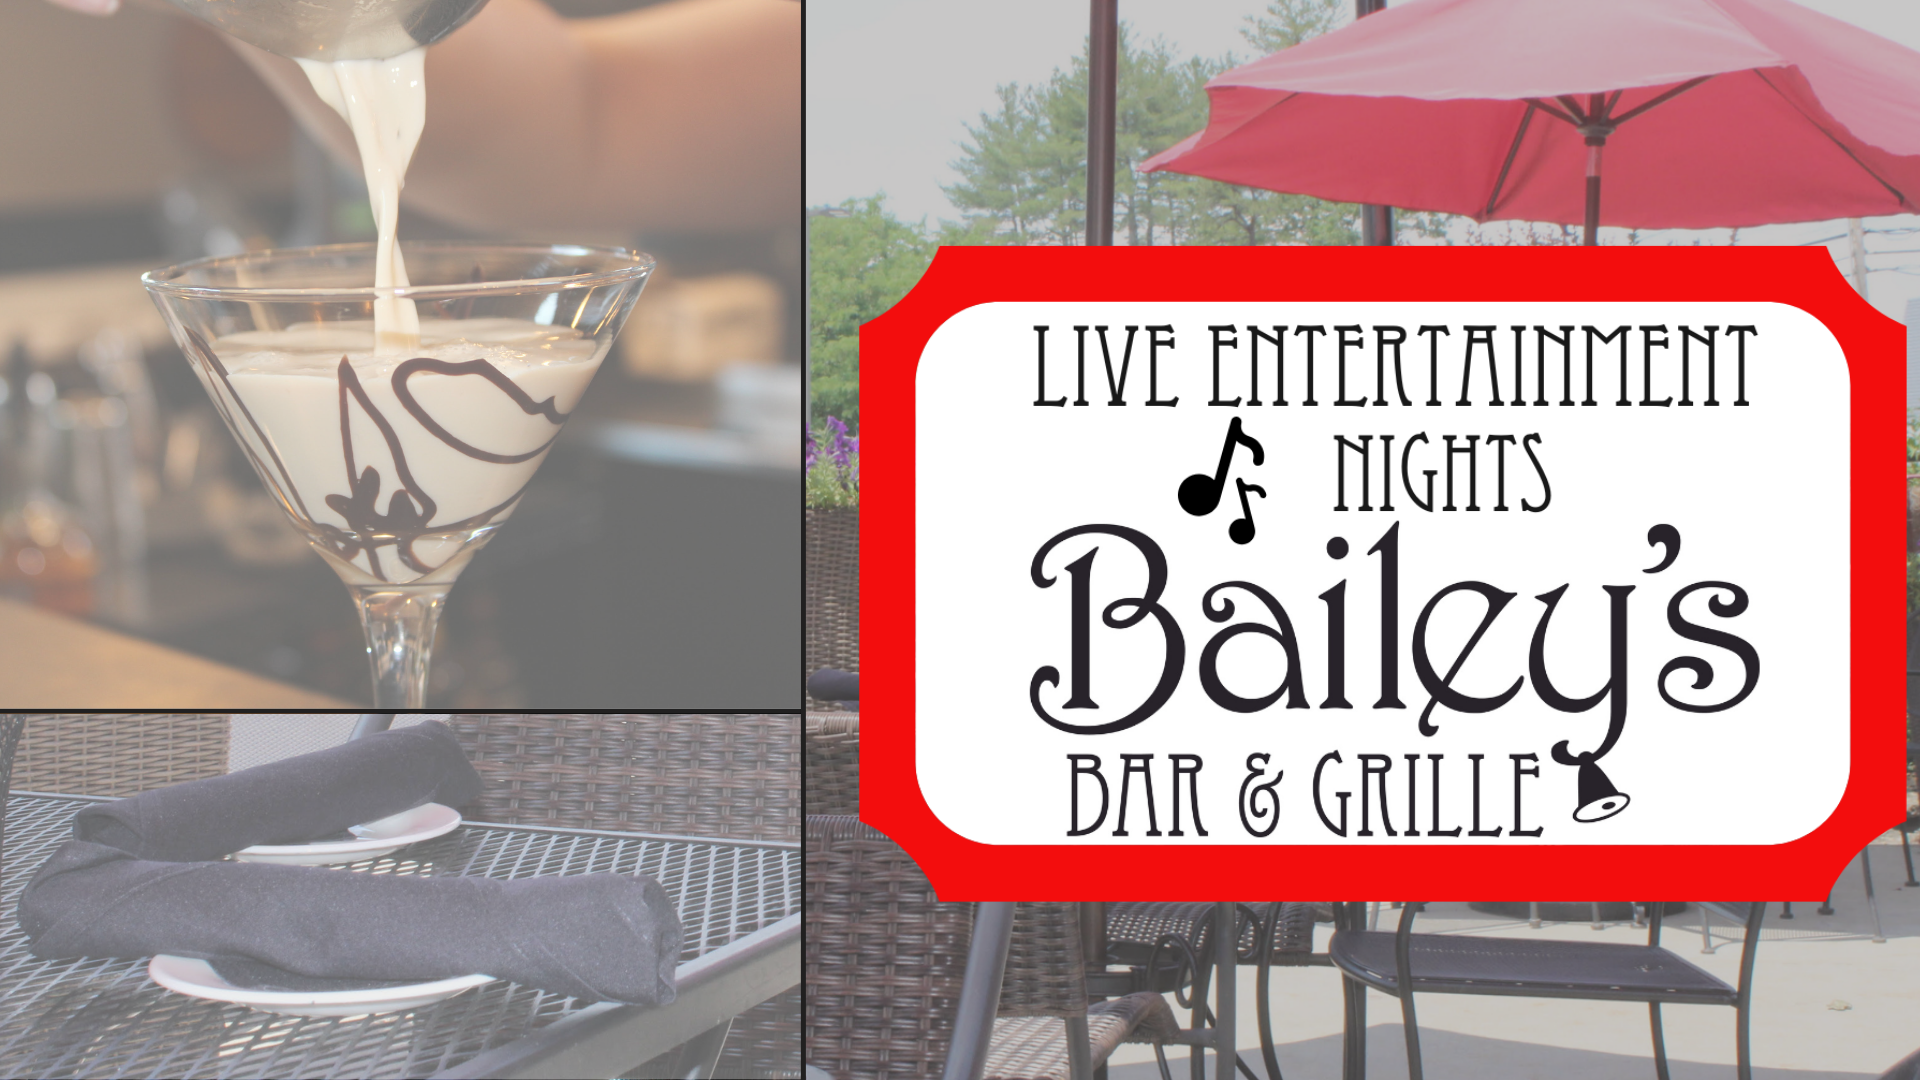 Pictures of a Bailey-tini cocktail, a patio dining area, a patio table. Text: Live Entertainment WED/SAT/SUN Bailey's Bar & Grille